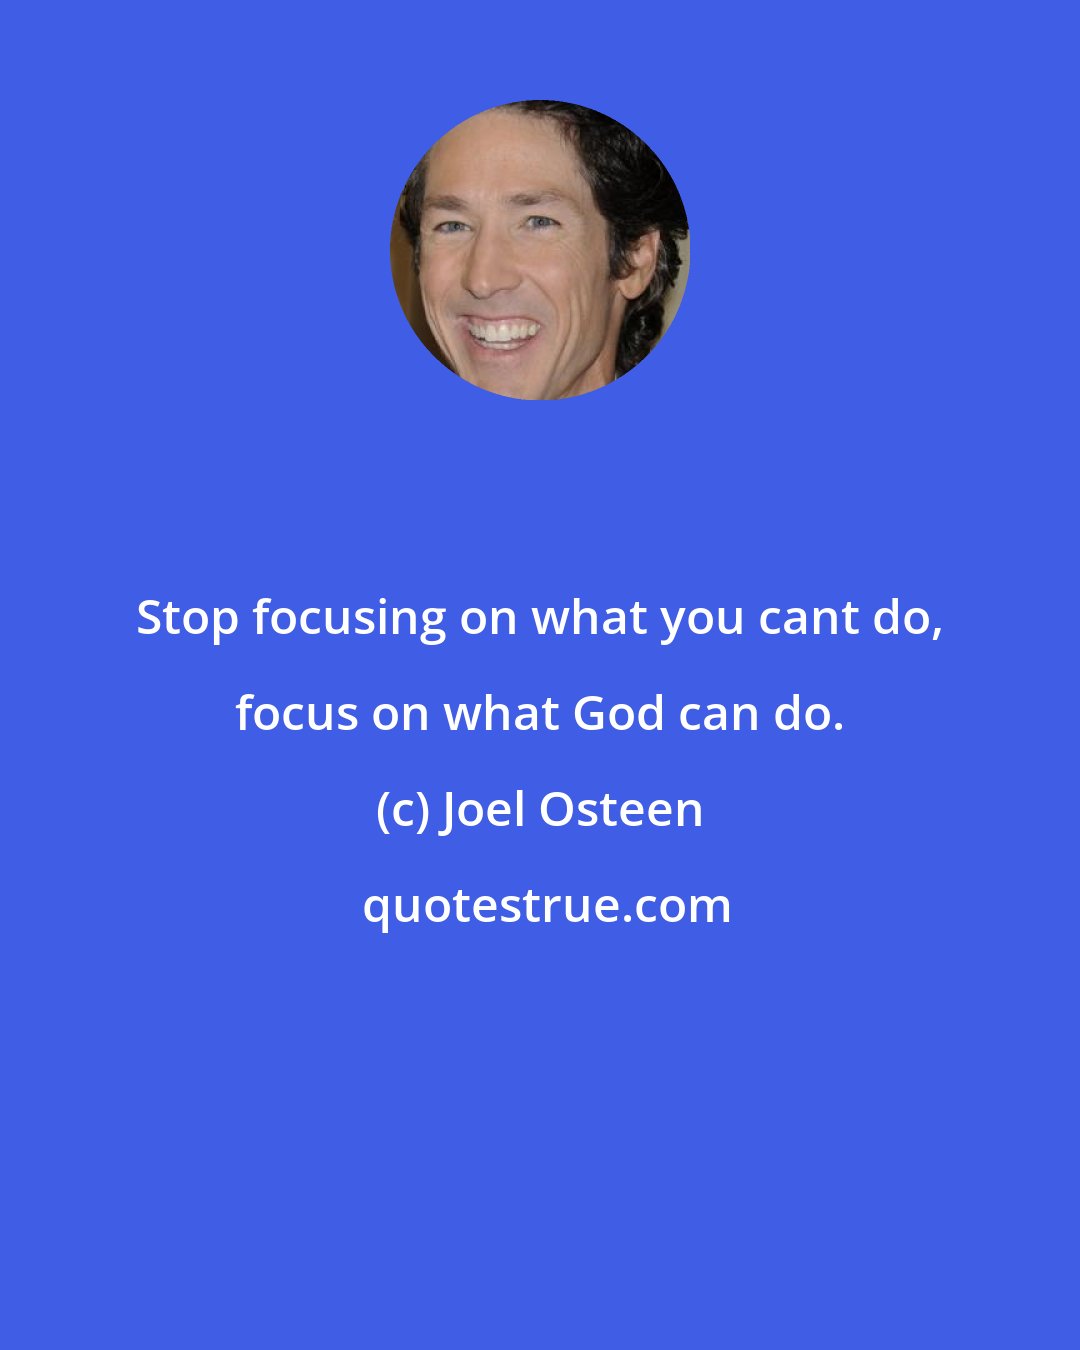 Joel Osteen: Stop focusing on what you cant do, focus on what God can do.